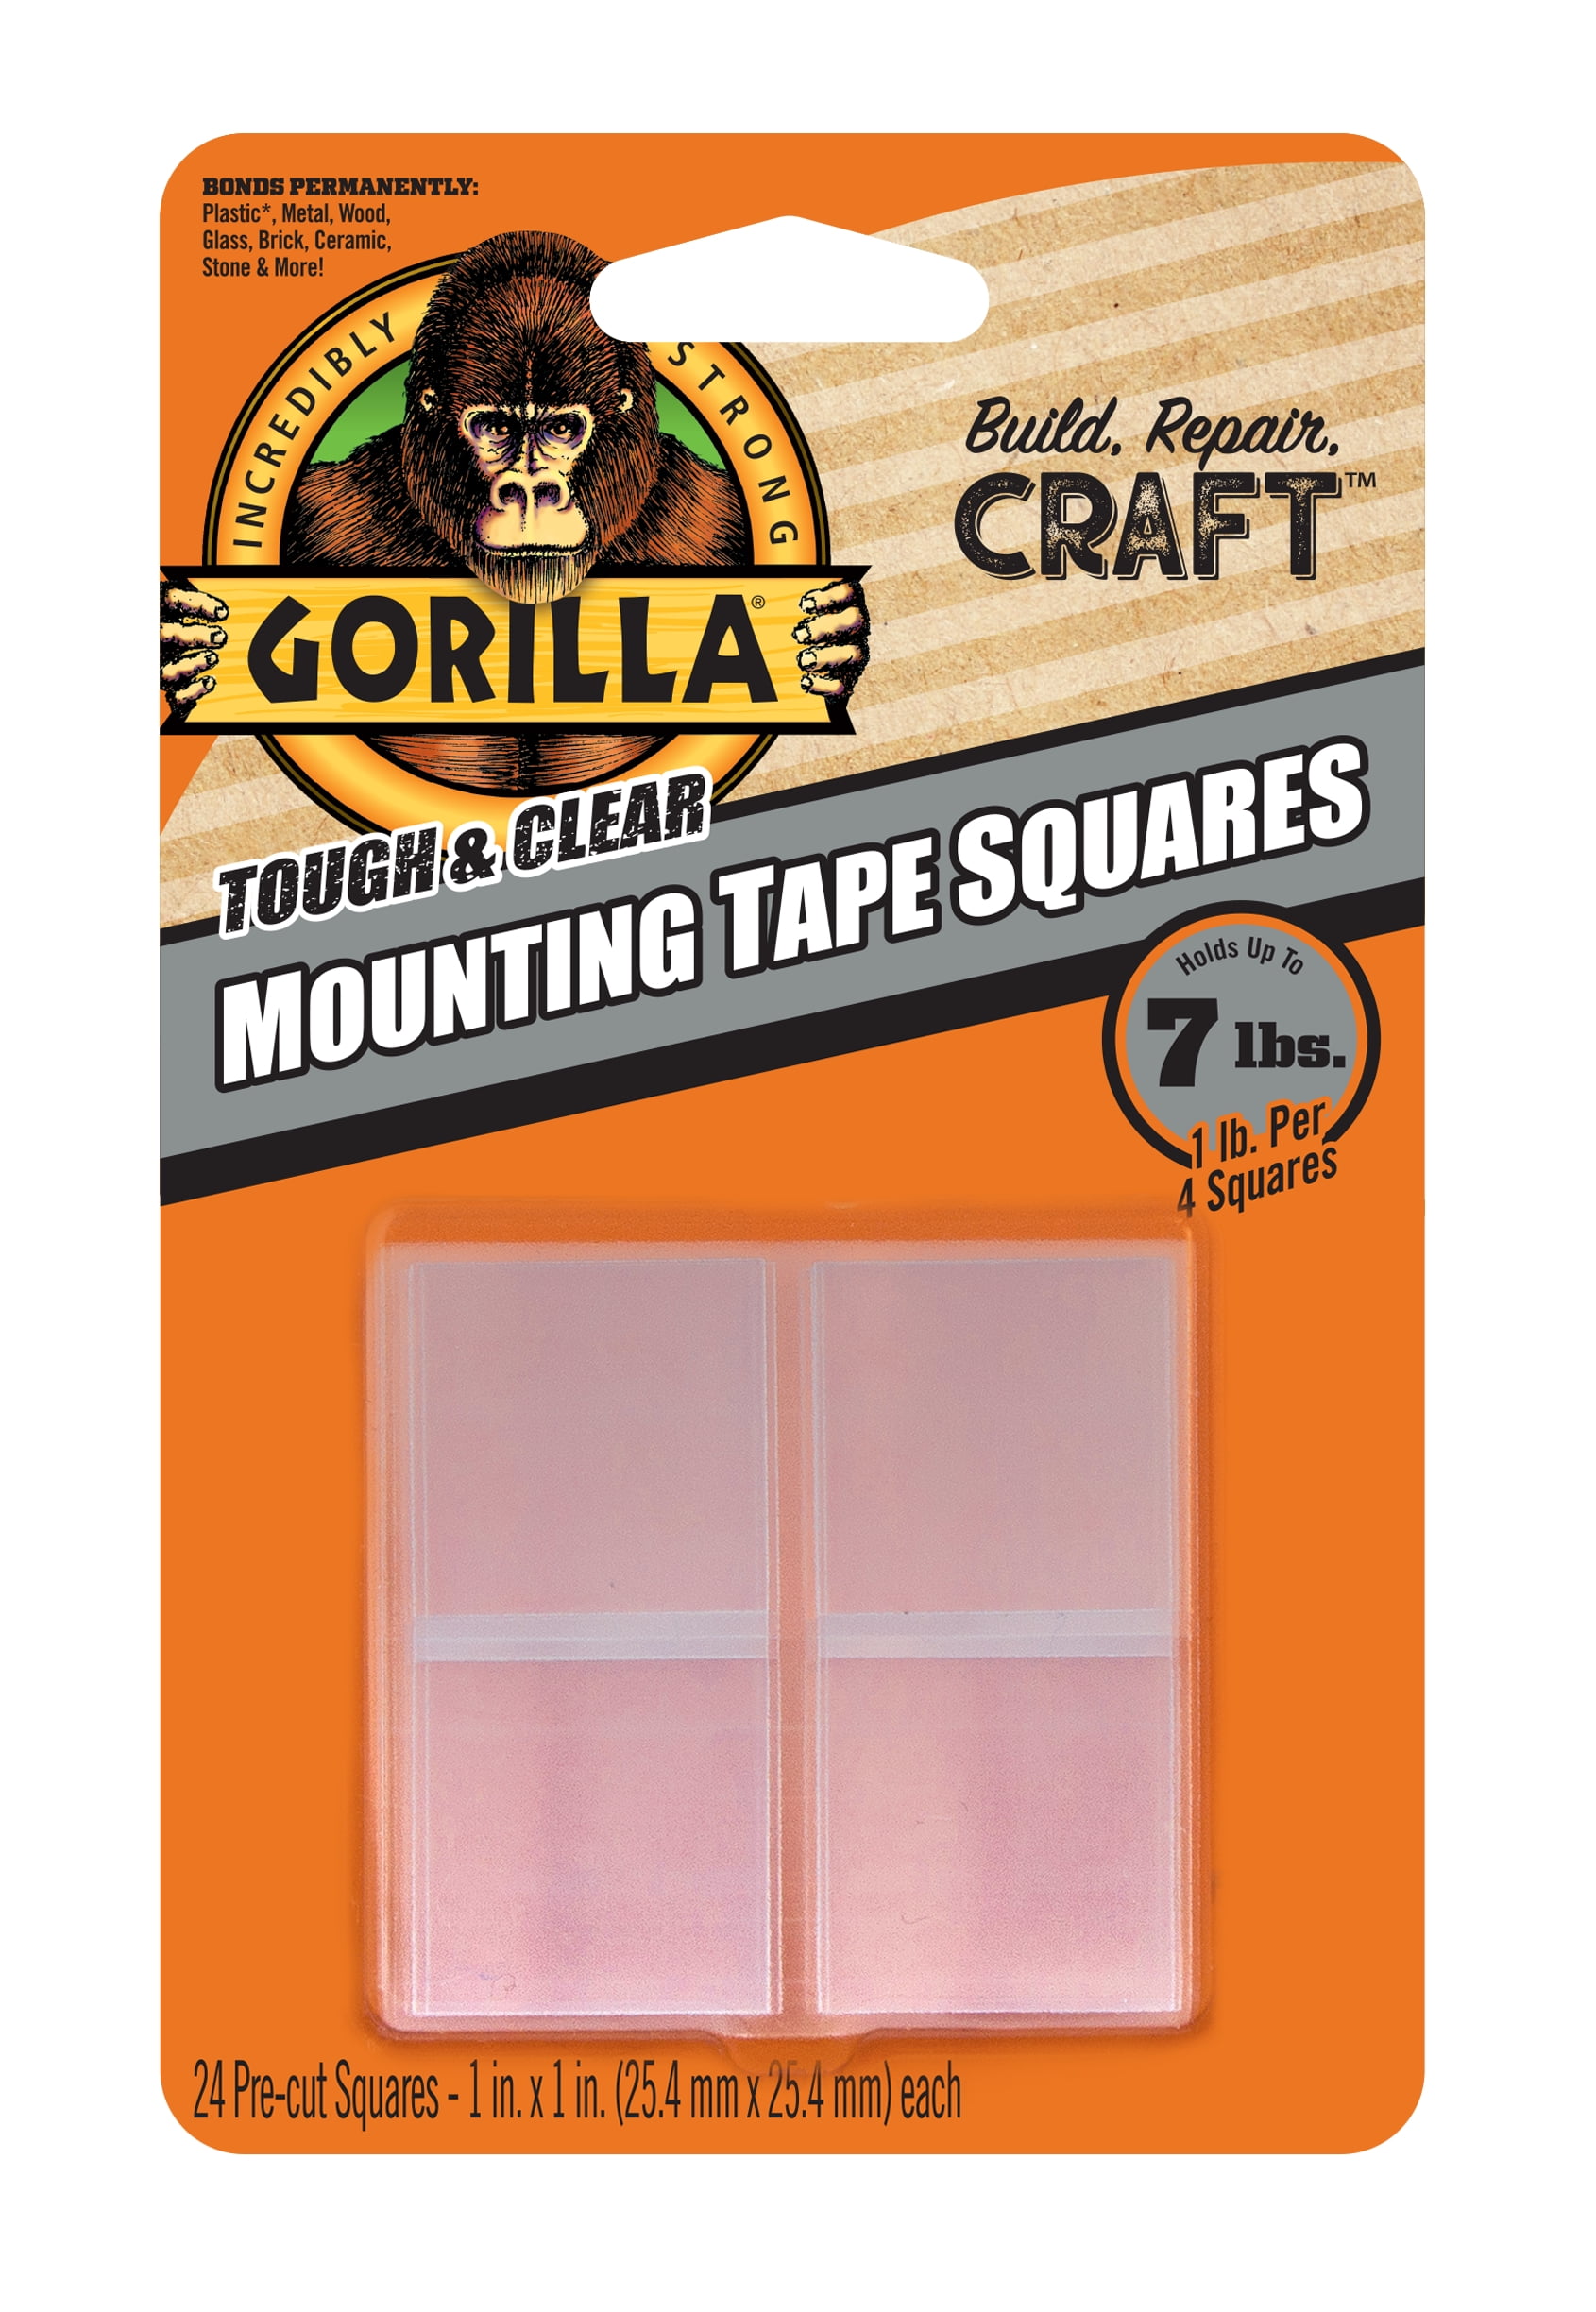 Gorilla Tough & Clear Double-Sided Mounting Tape, 60 Roll/ Model